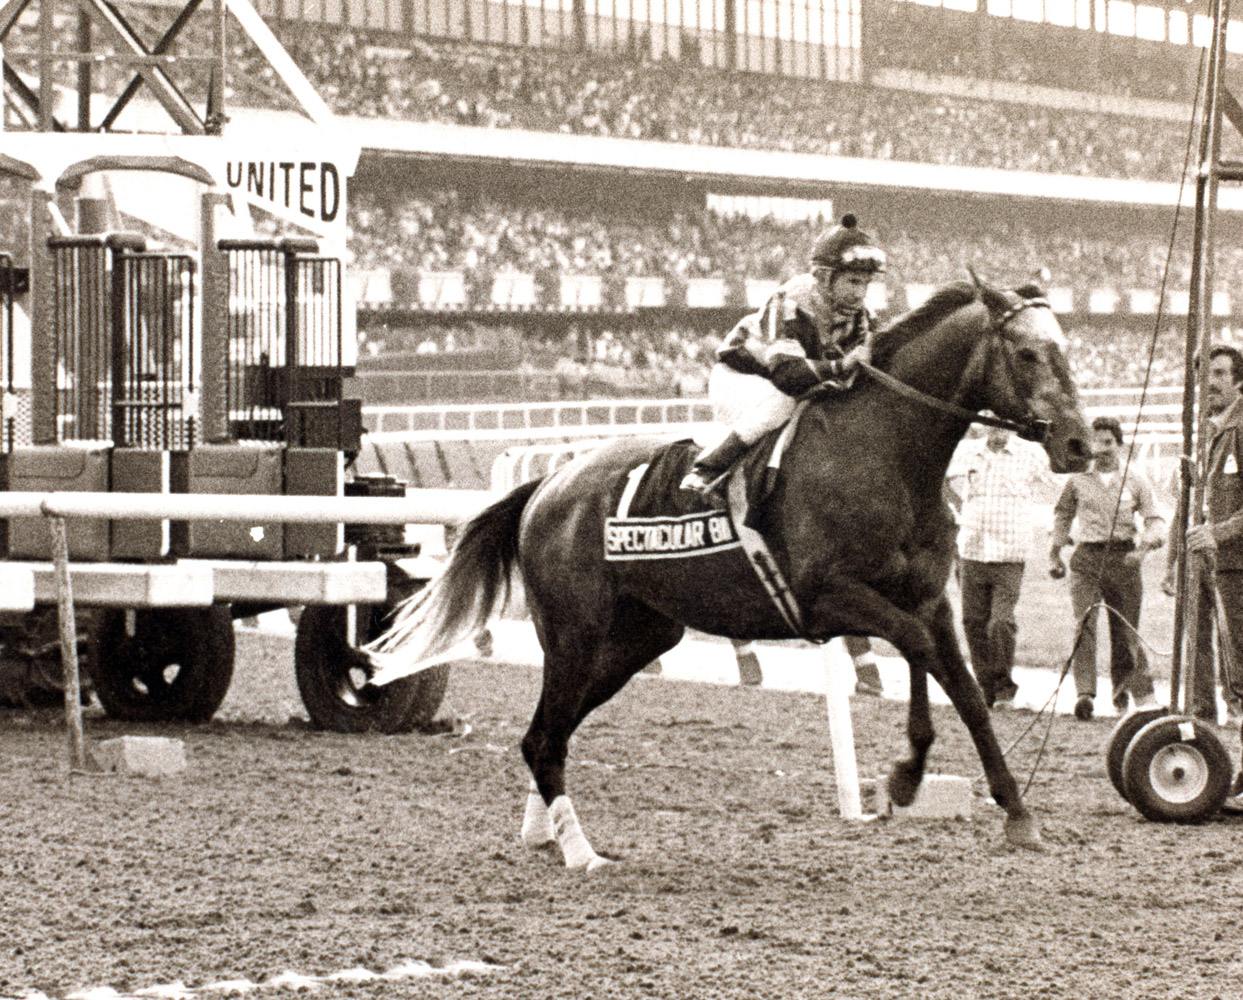 Spectacular Bid (Bill Shoemaker up) breaking from the gate for his walkover in the 1980 Woodward at Belmont, his final career race (Museum Collection)